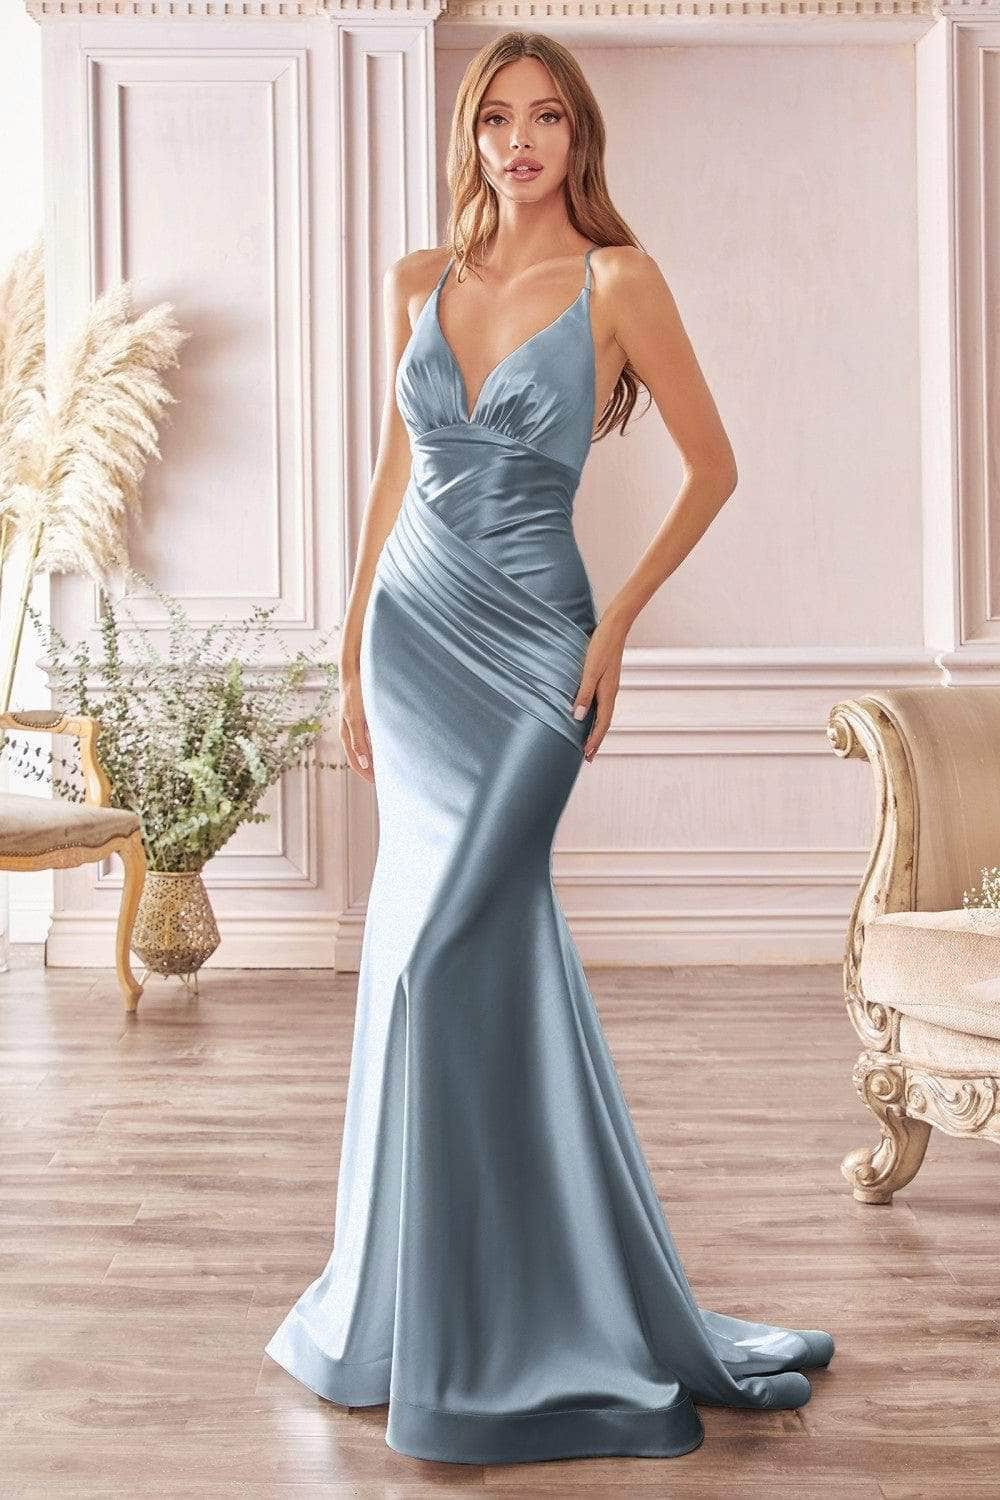 Romantic, Glamorous & Sexy: 12 Statement Evening Dresses For Year End  Celebrations